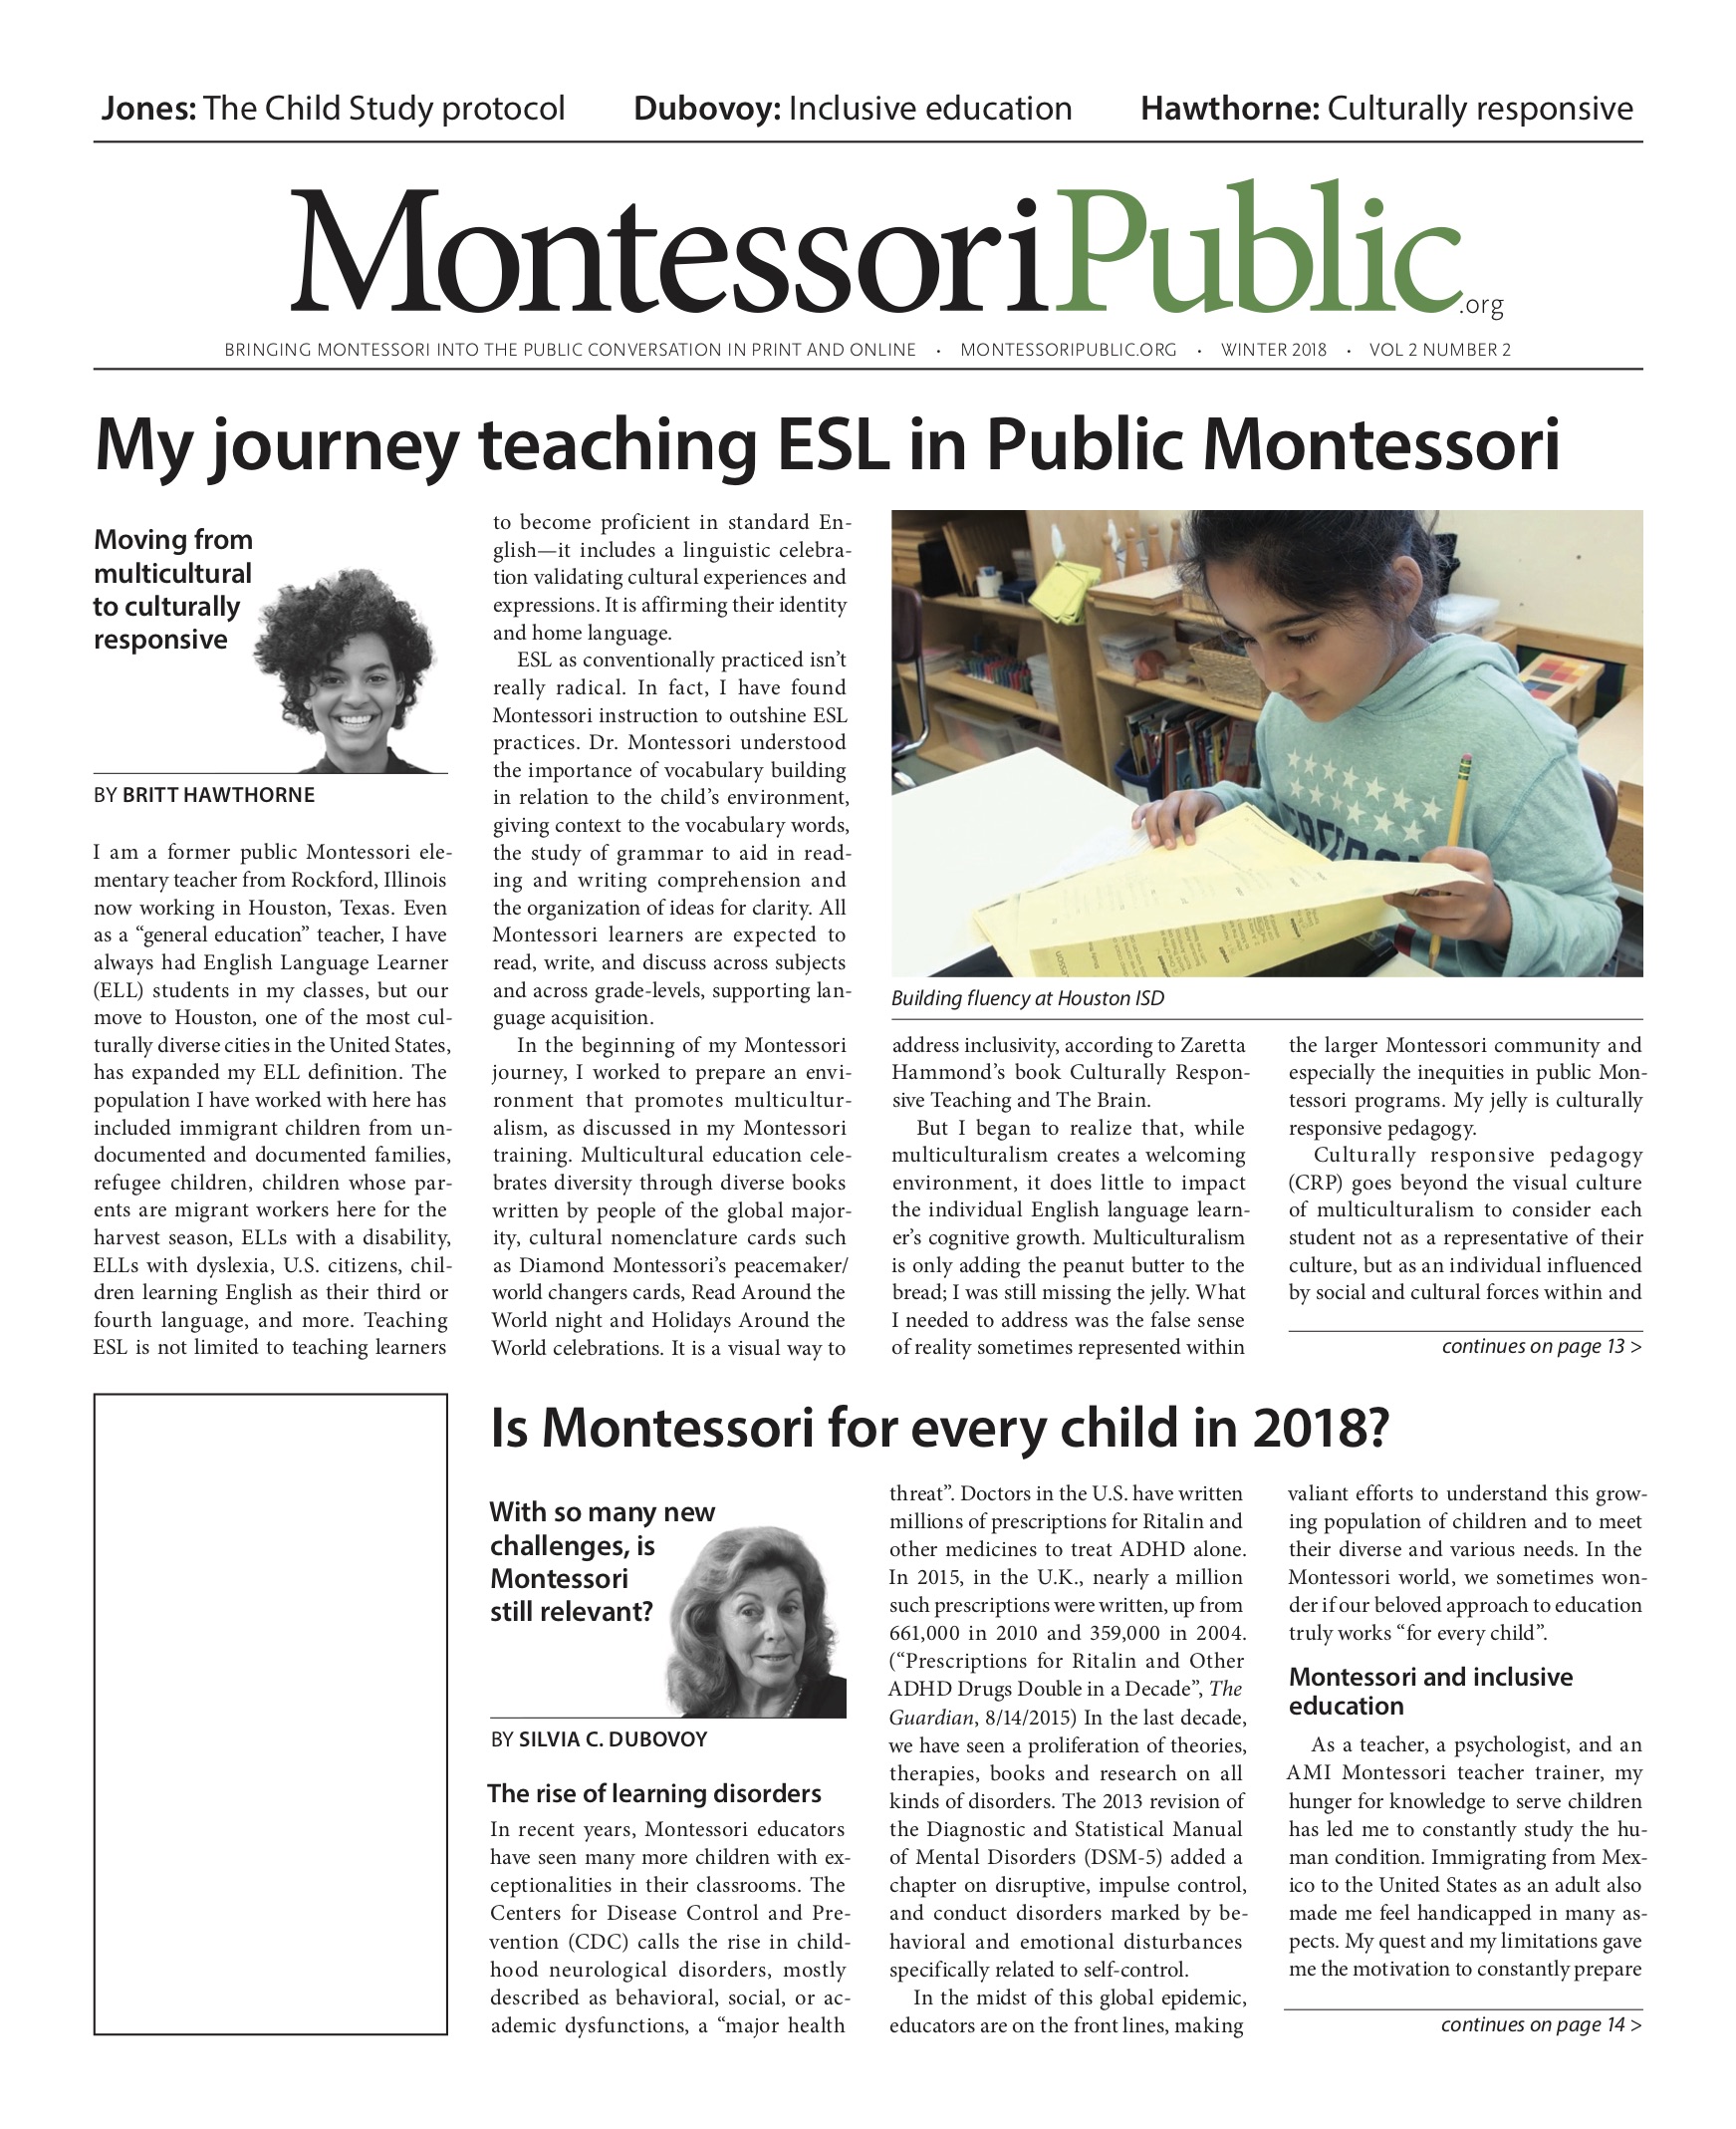 MontessoriPublic—Print Edition Volume 2 #2: SPED and ELL